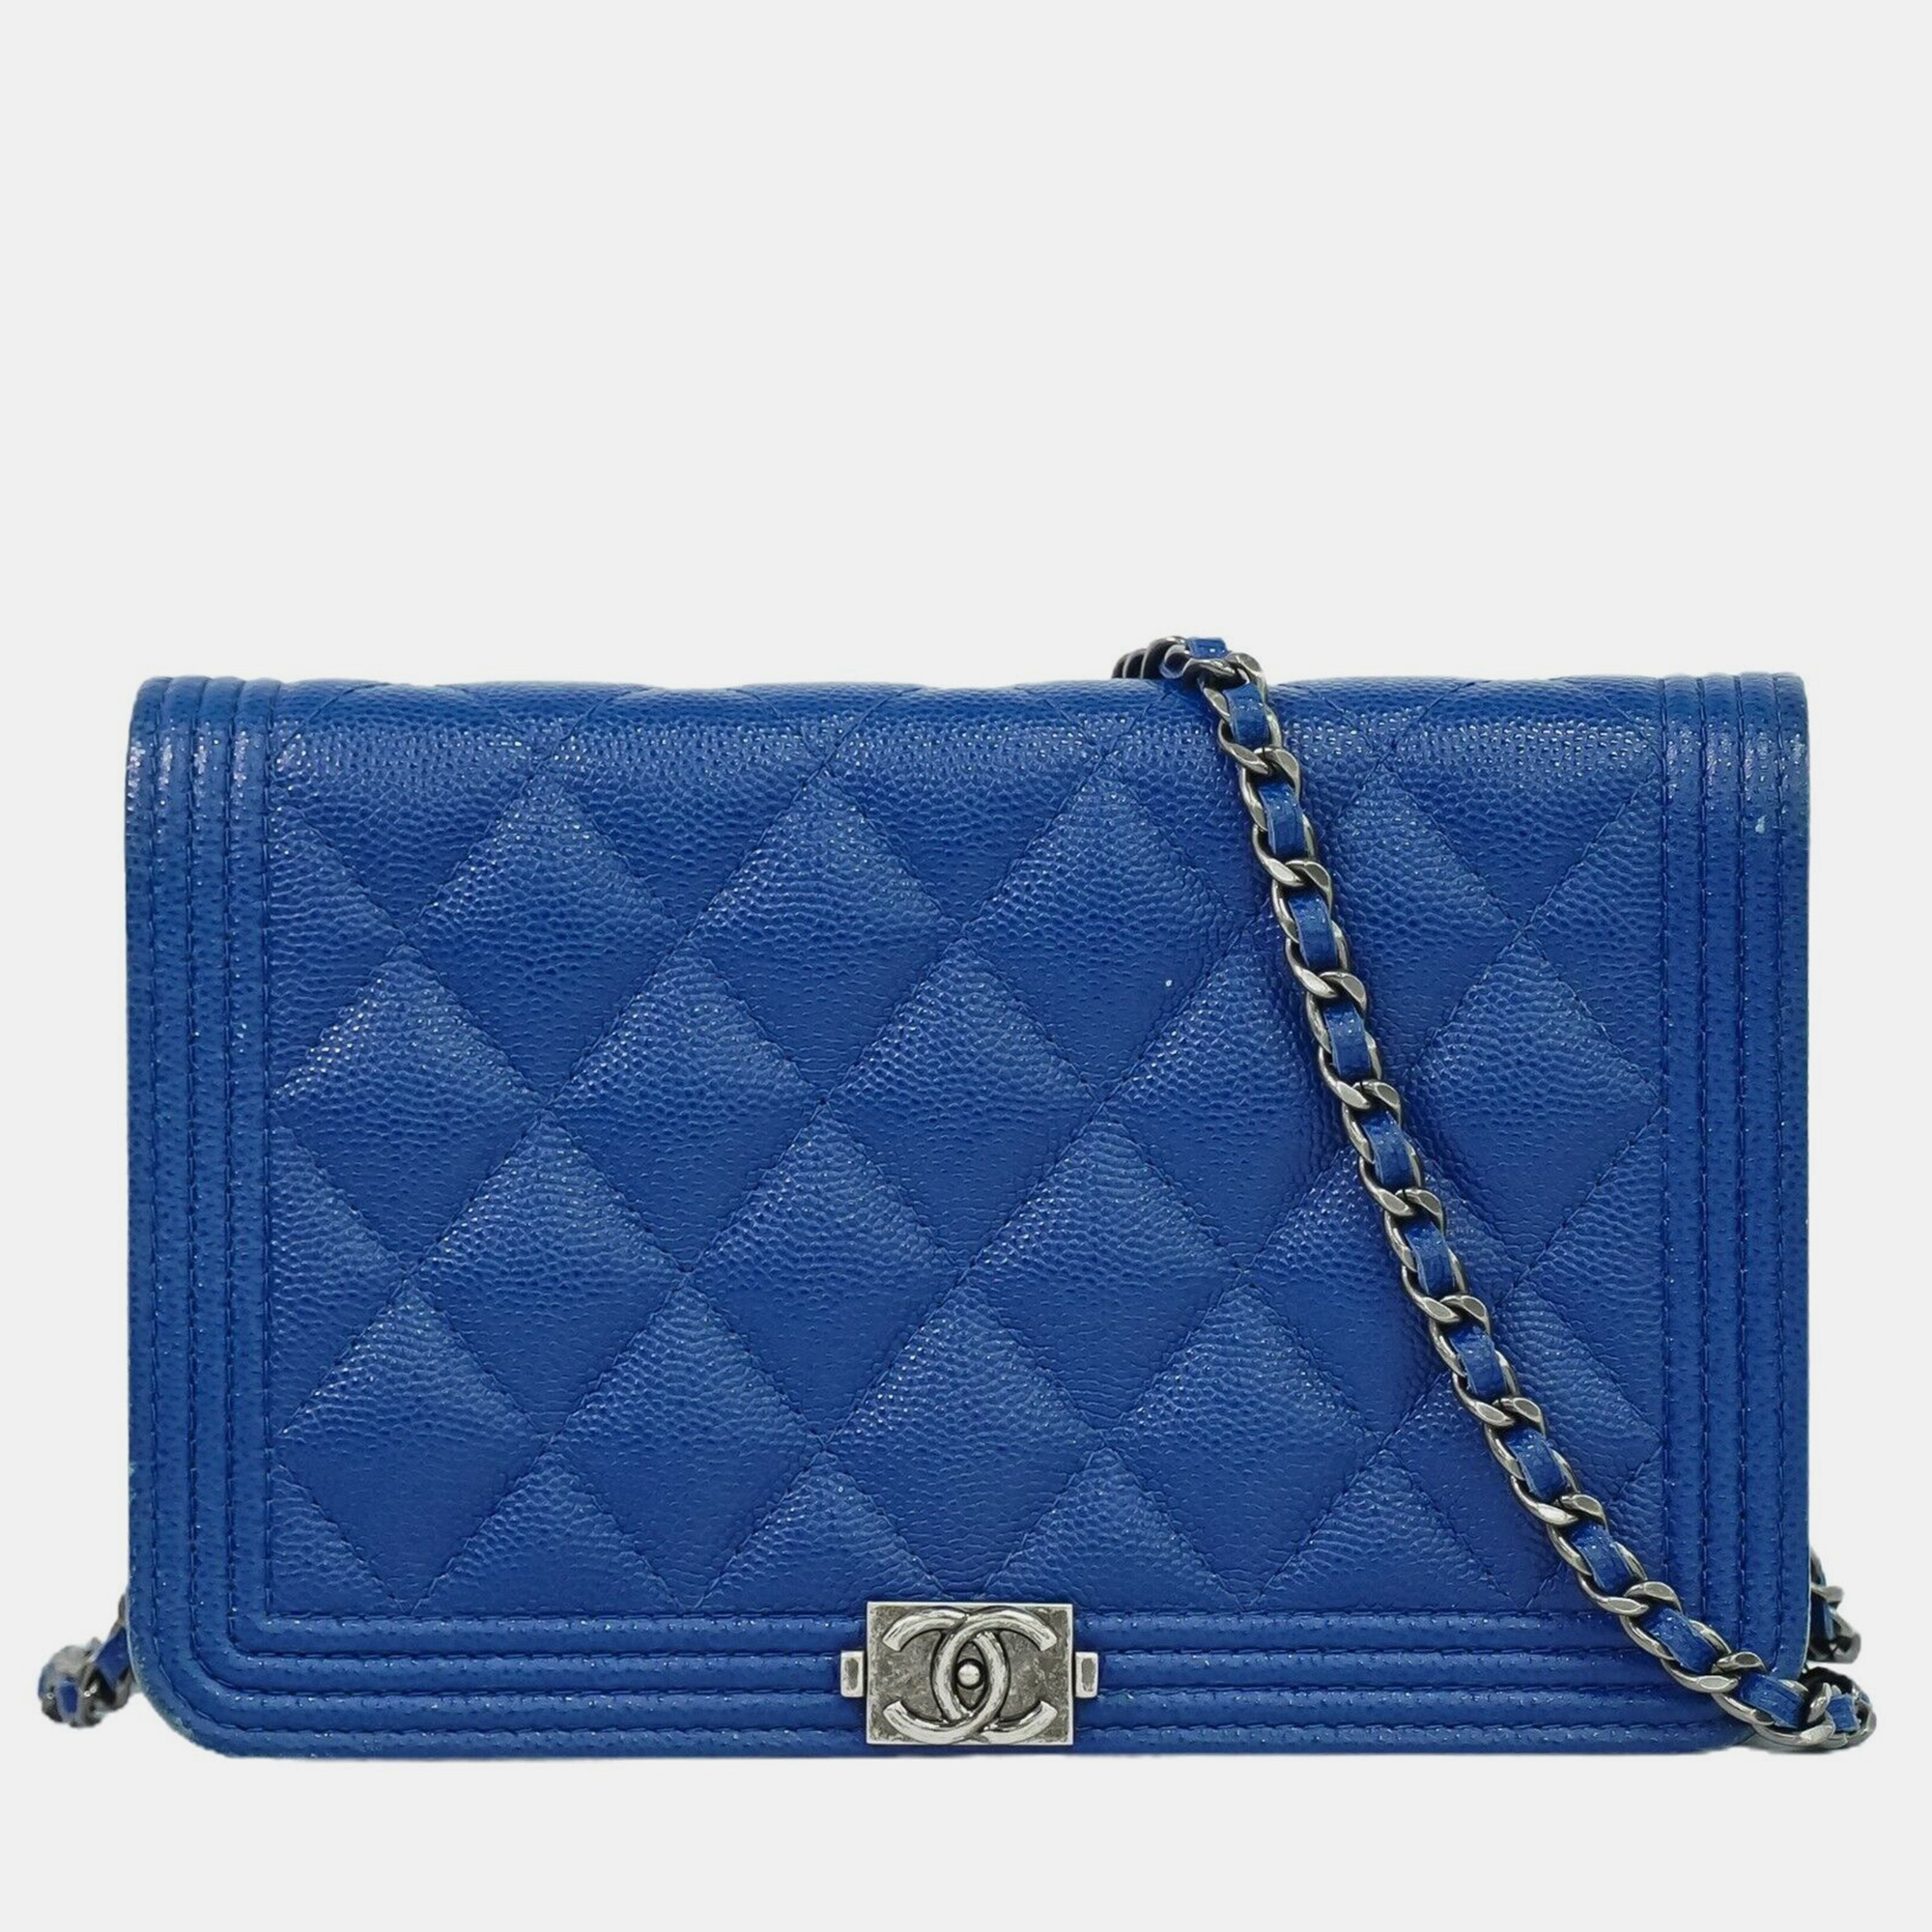 Chanel blue leather boy wallet on chain